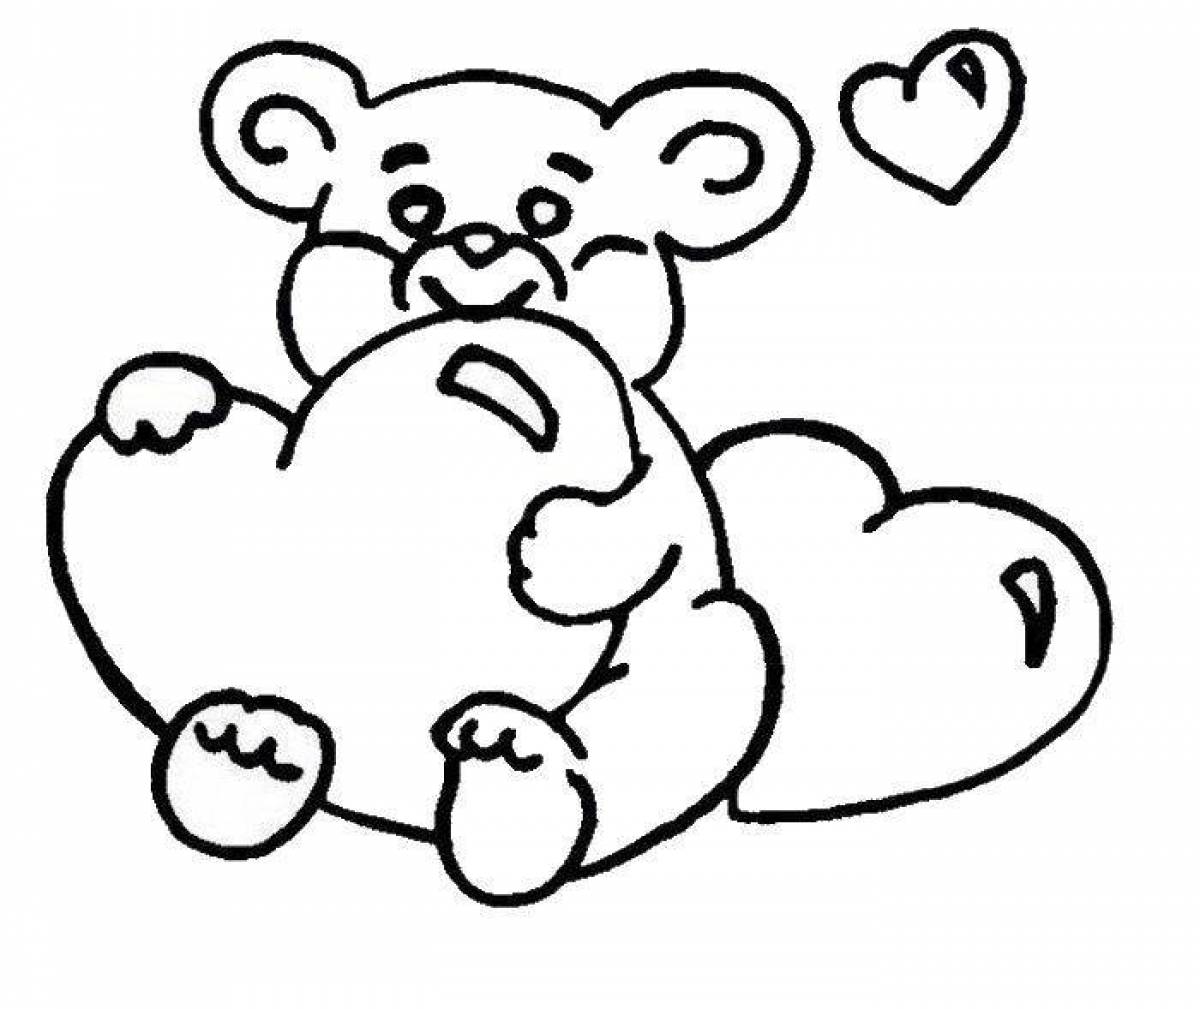 Coloring page shining teddy bear with a heart